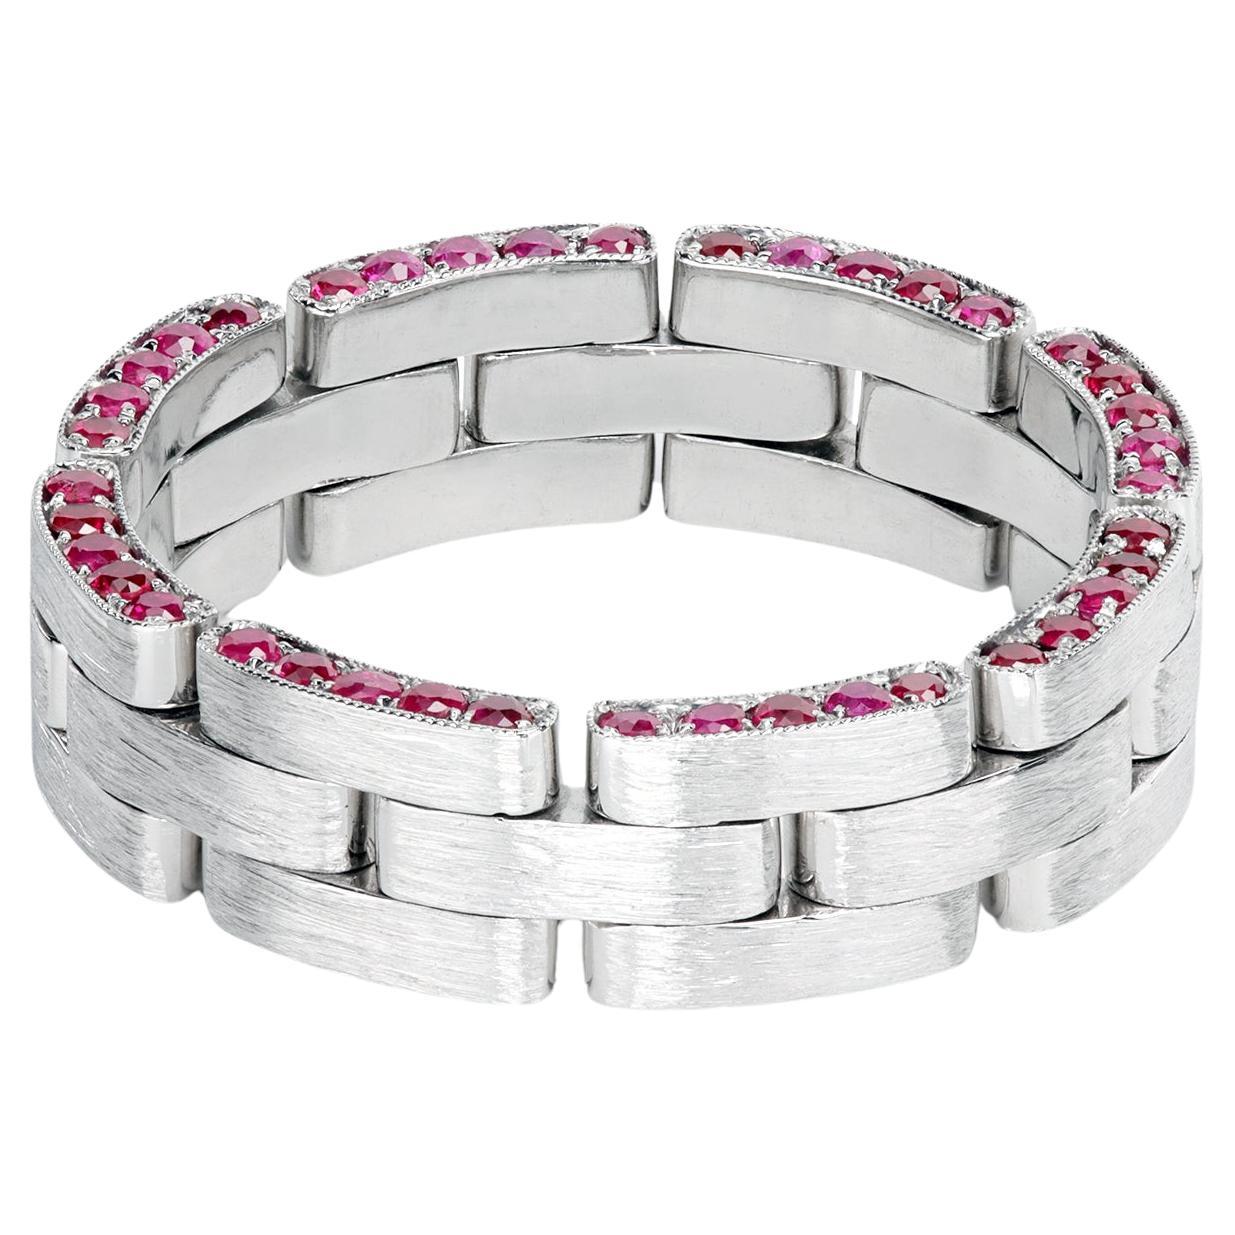 Leon Mege platinum flexible wedding band with rubies For Sale